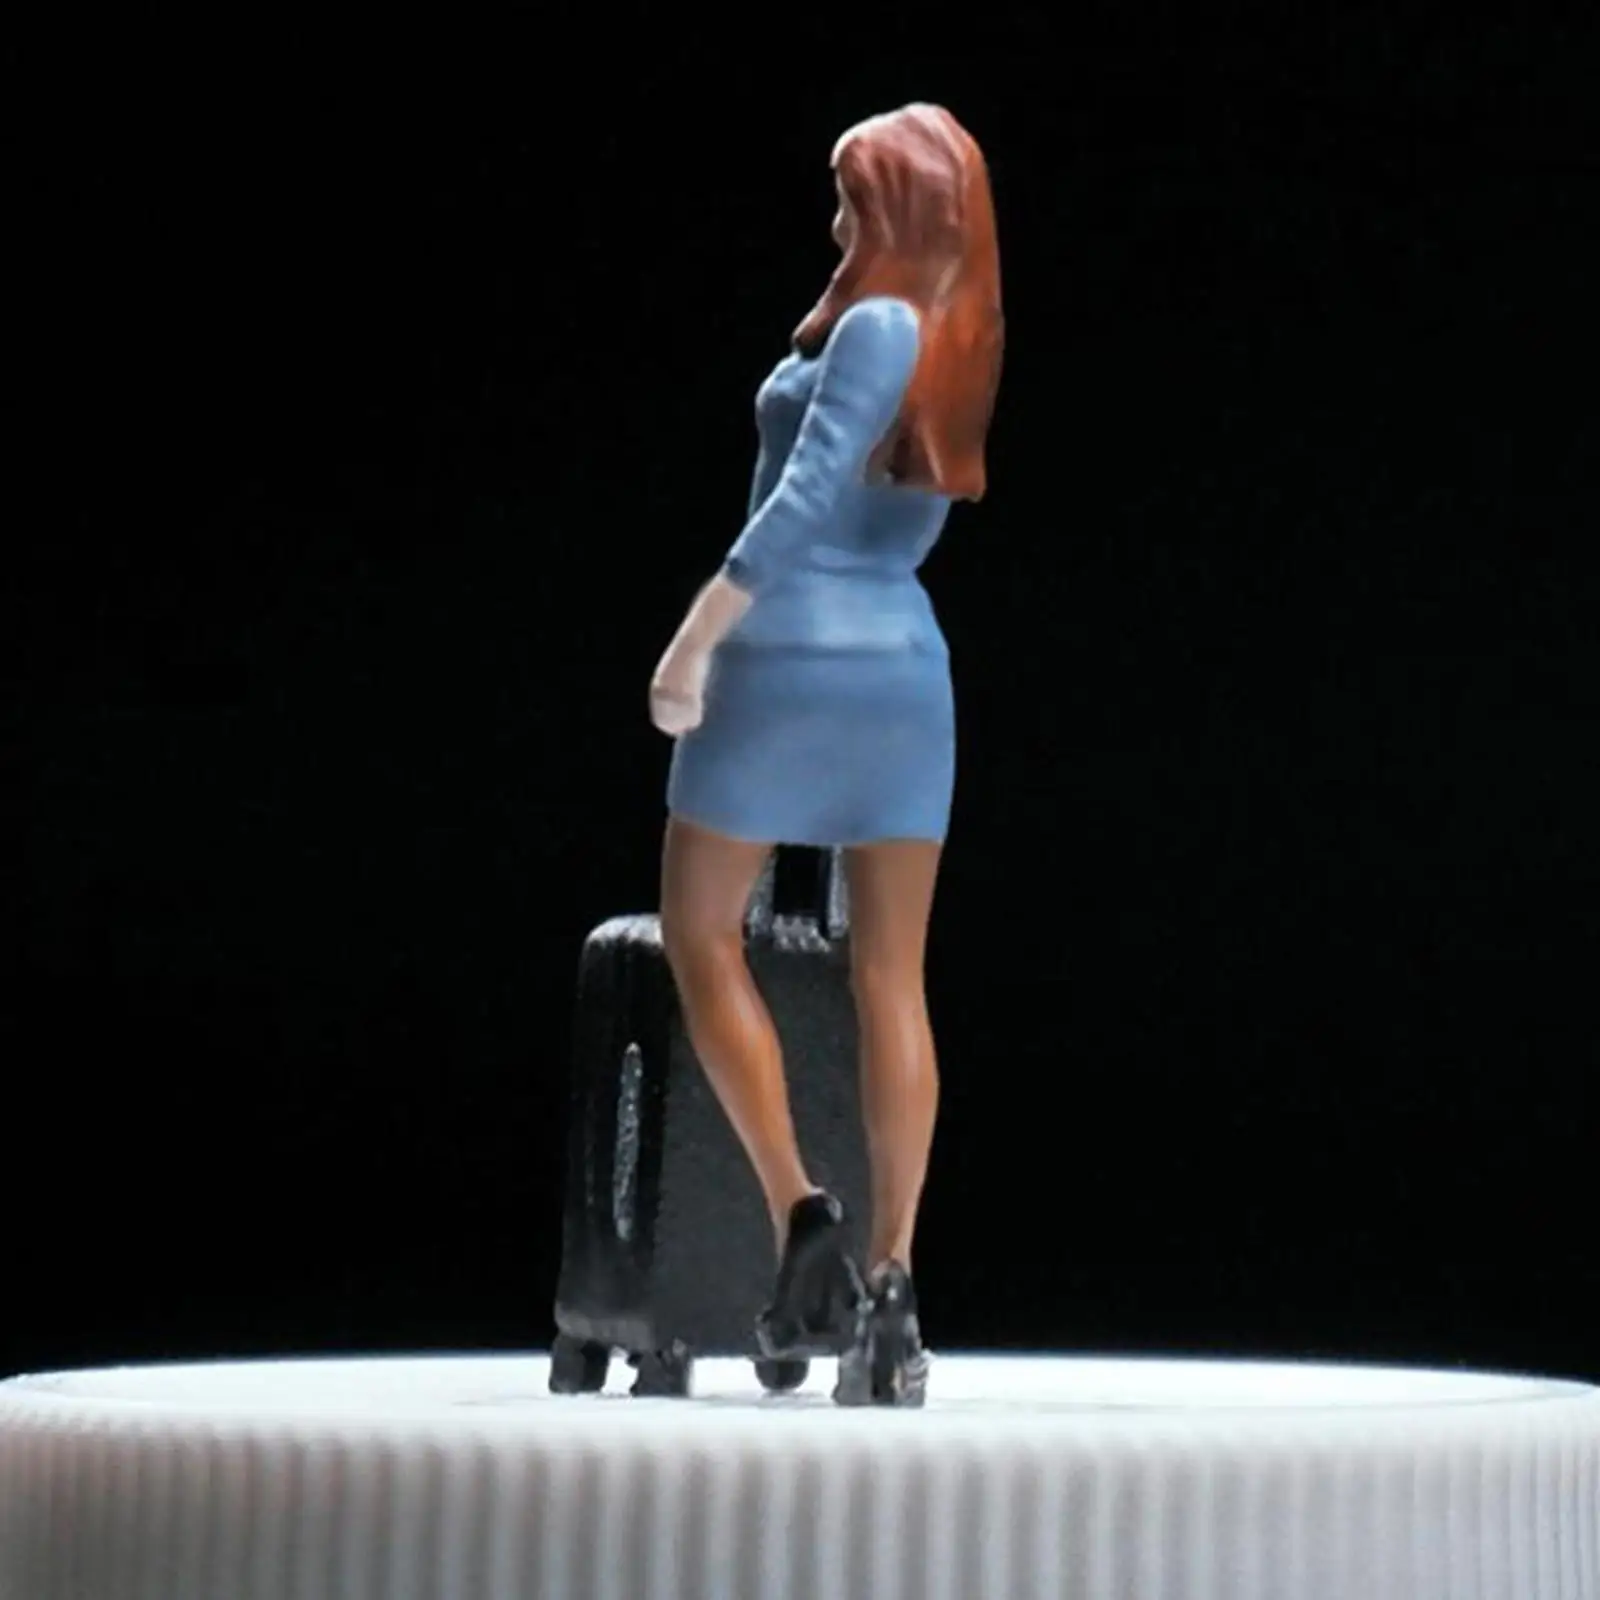 1/64 flying Attendant Model Girl People Figurine Painted Figures for Train Station Layout